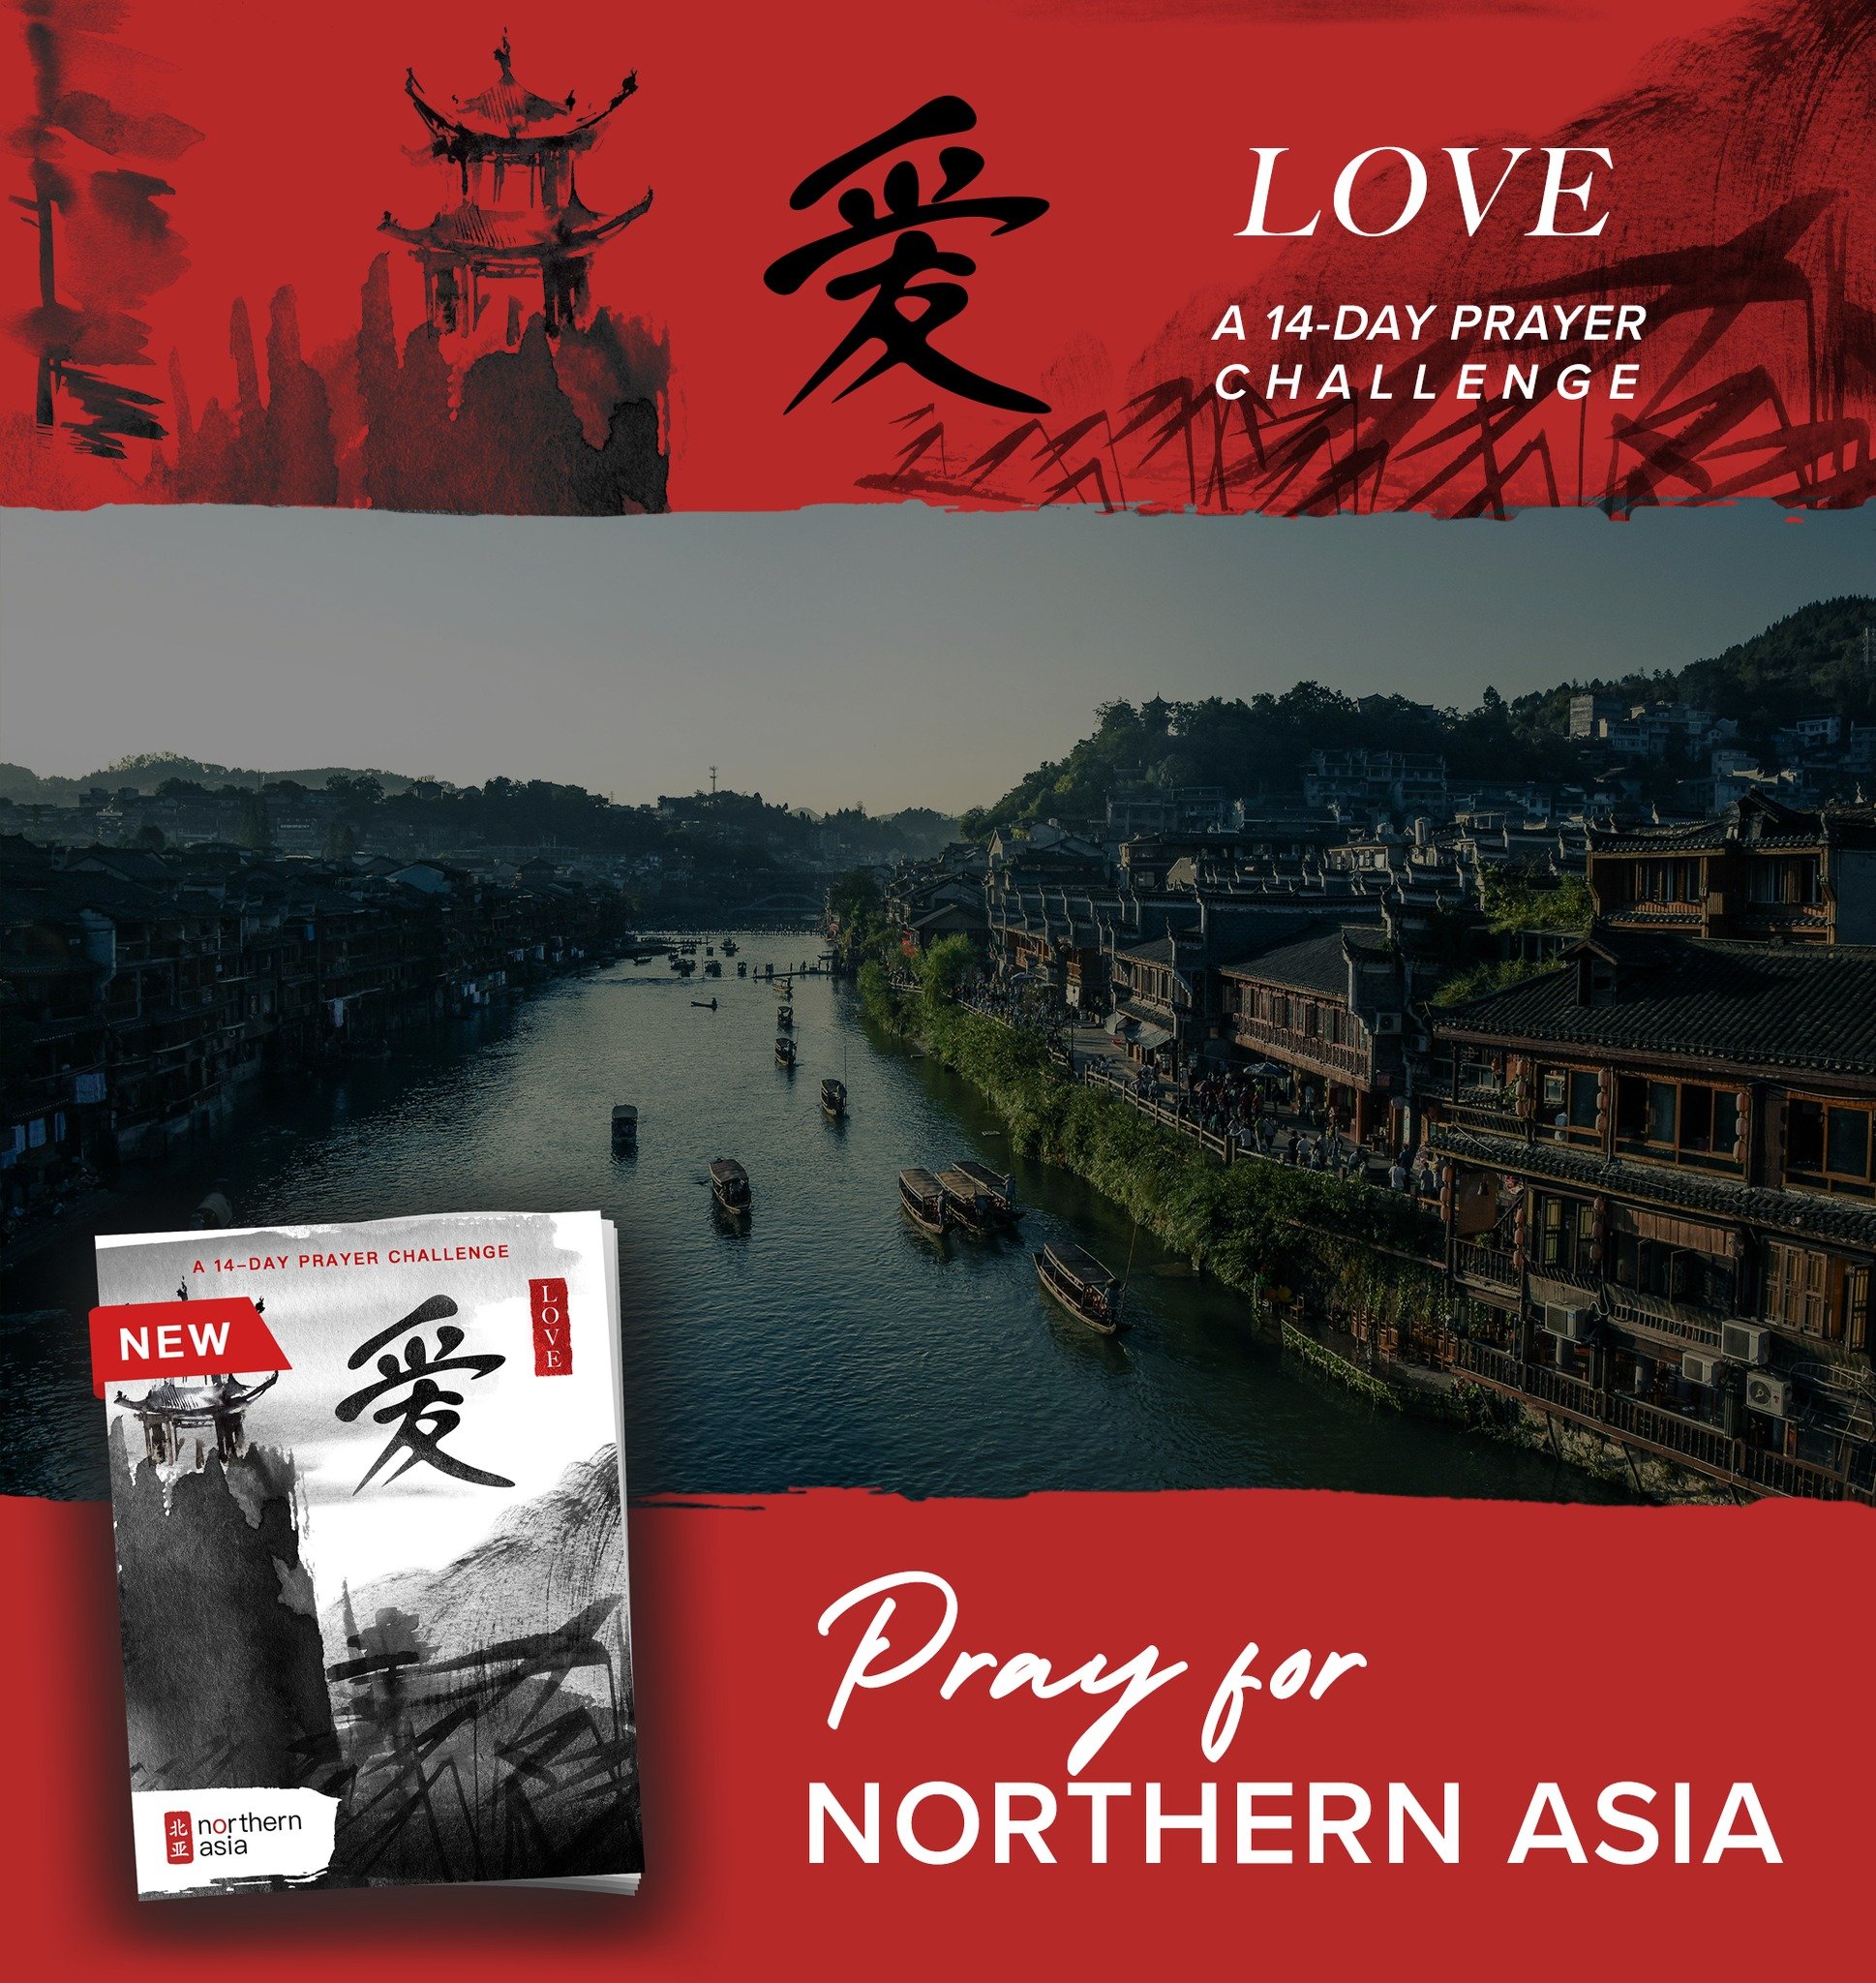 We believe in the power of prayer. 🙏

Join our NEW 14-day prayer challenge, centered on LOVE for the people of Northern Asia. Let's believe together that our prayers will be heard, hearts will be prepared, and lives will be touched. ❤️